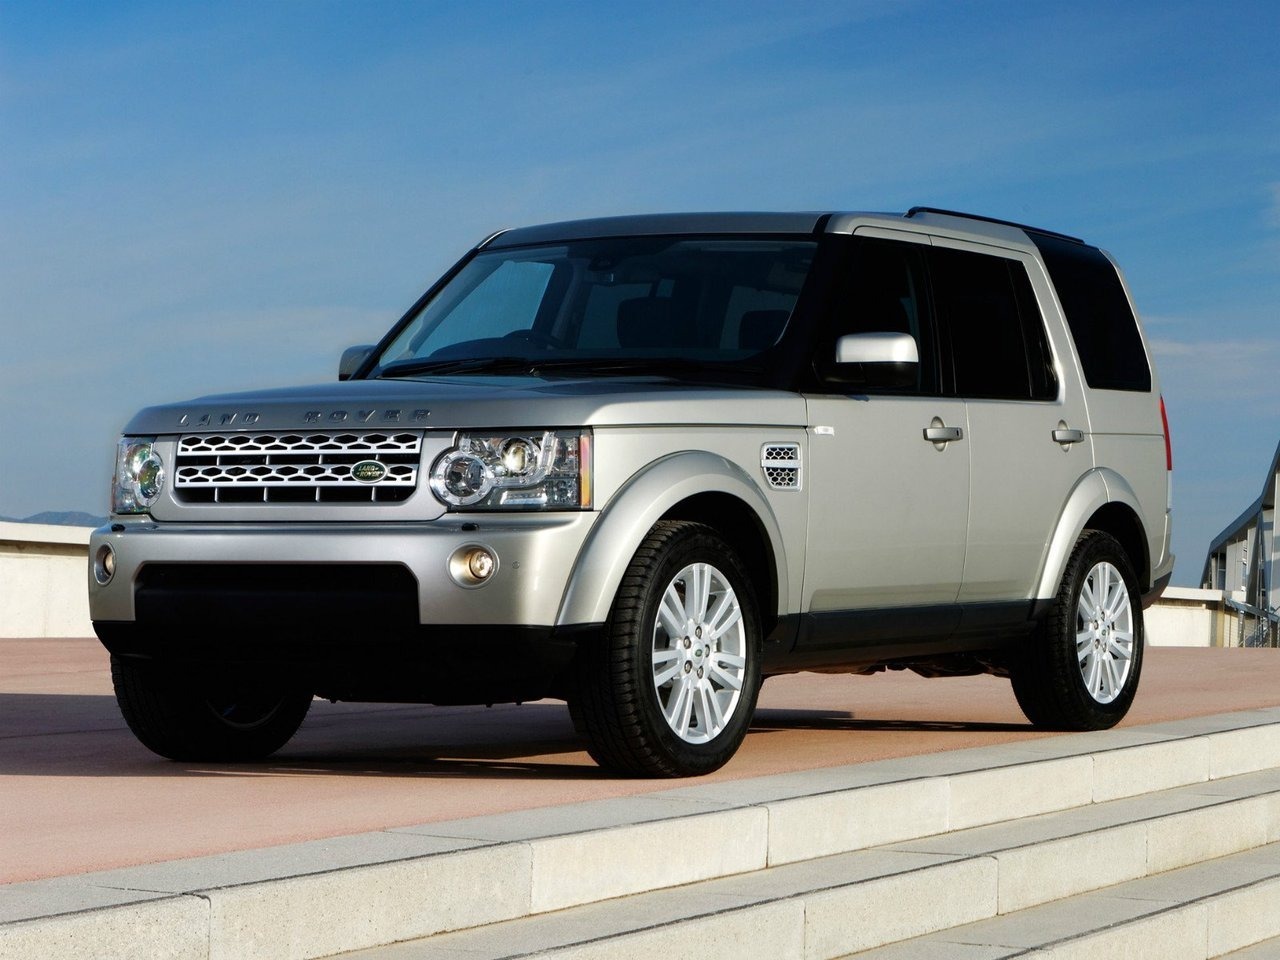 Land Rover Discovery IV, 3.0d - изображение 1